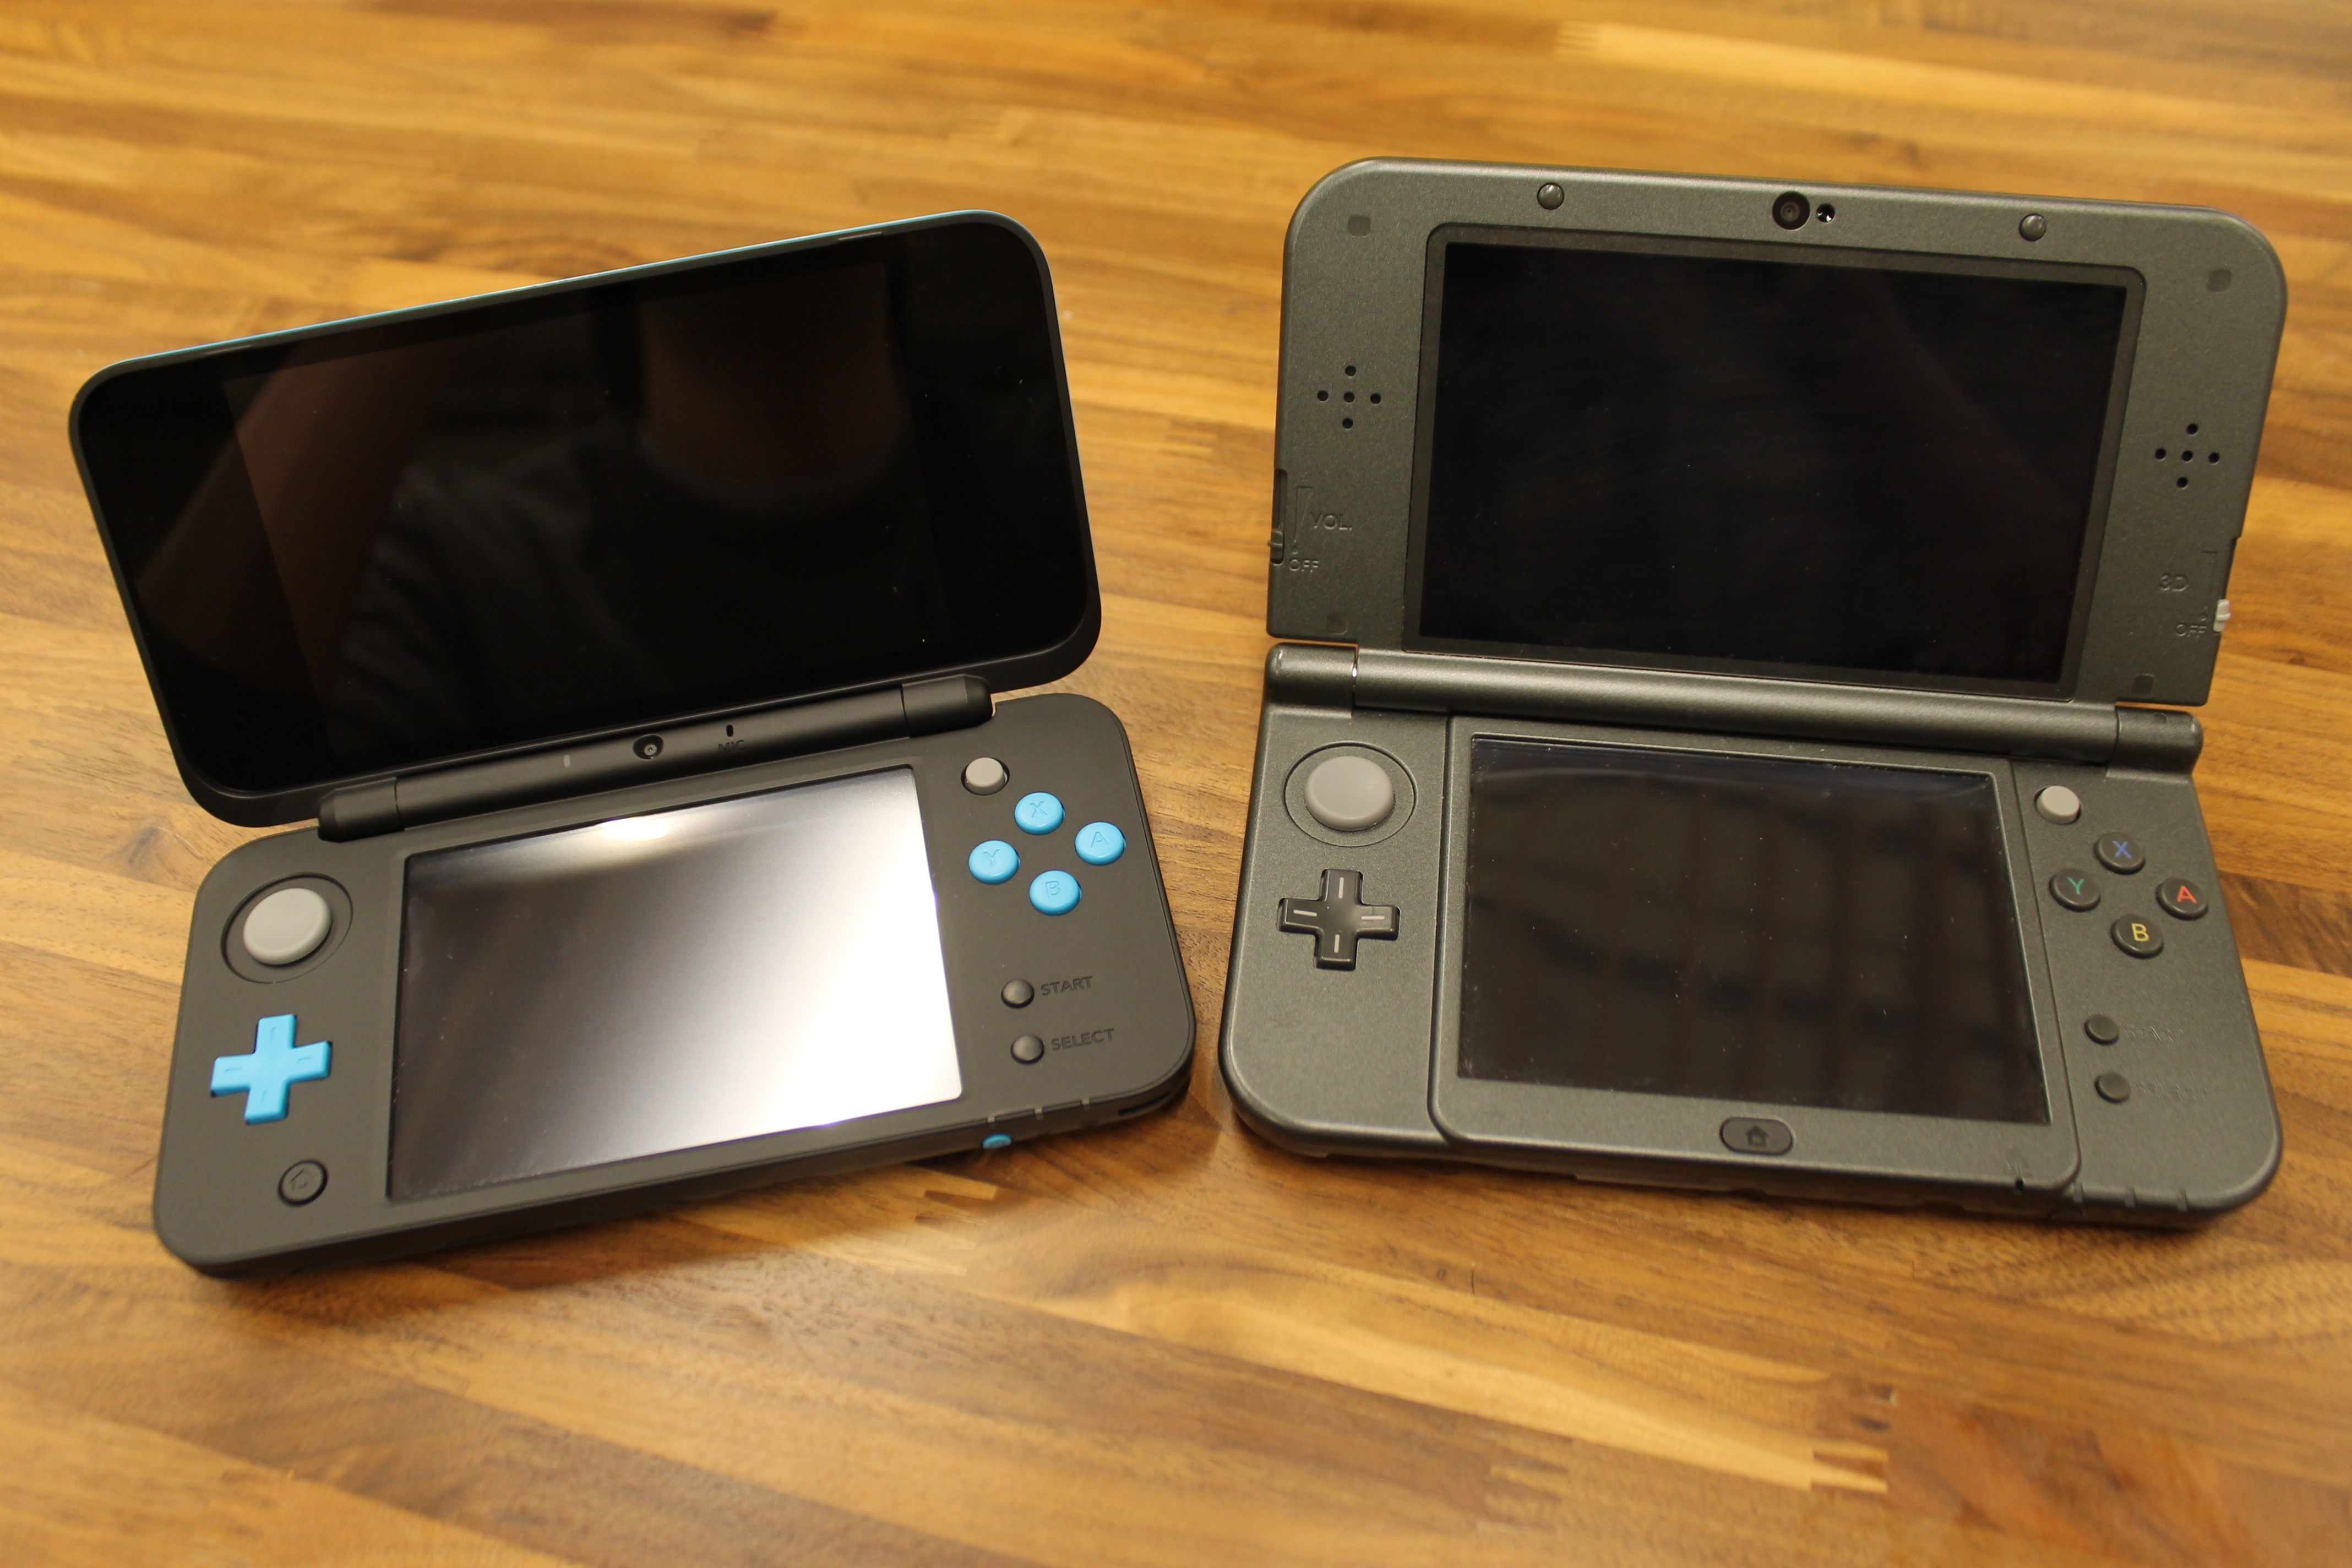 The New 2DS XL alongside the New 3DS XL. 